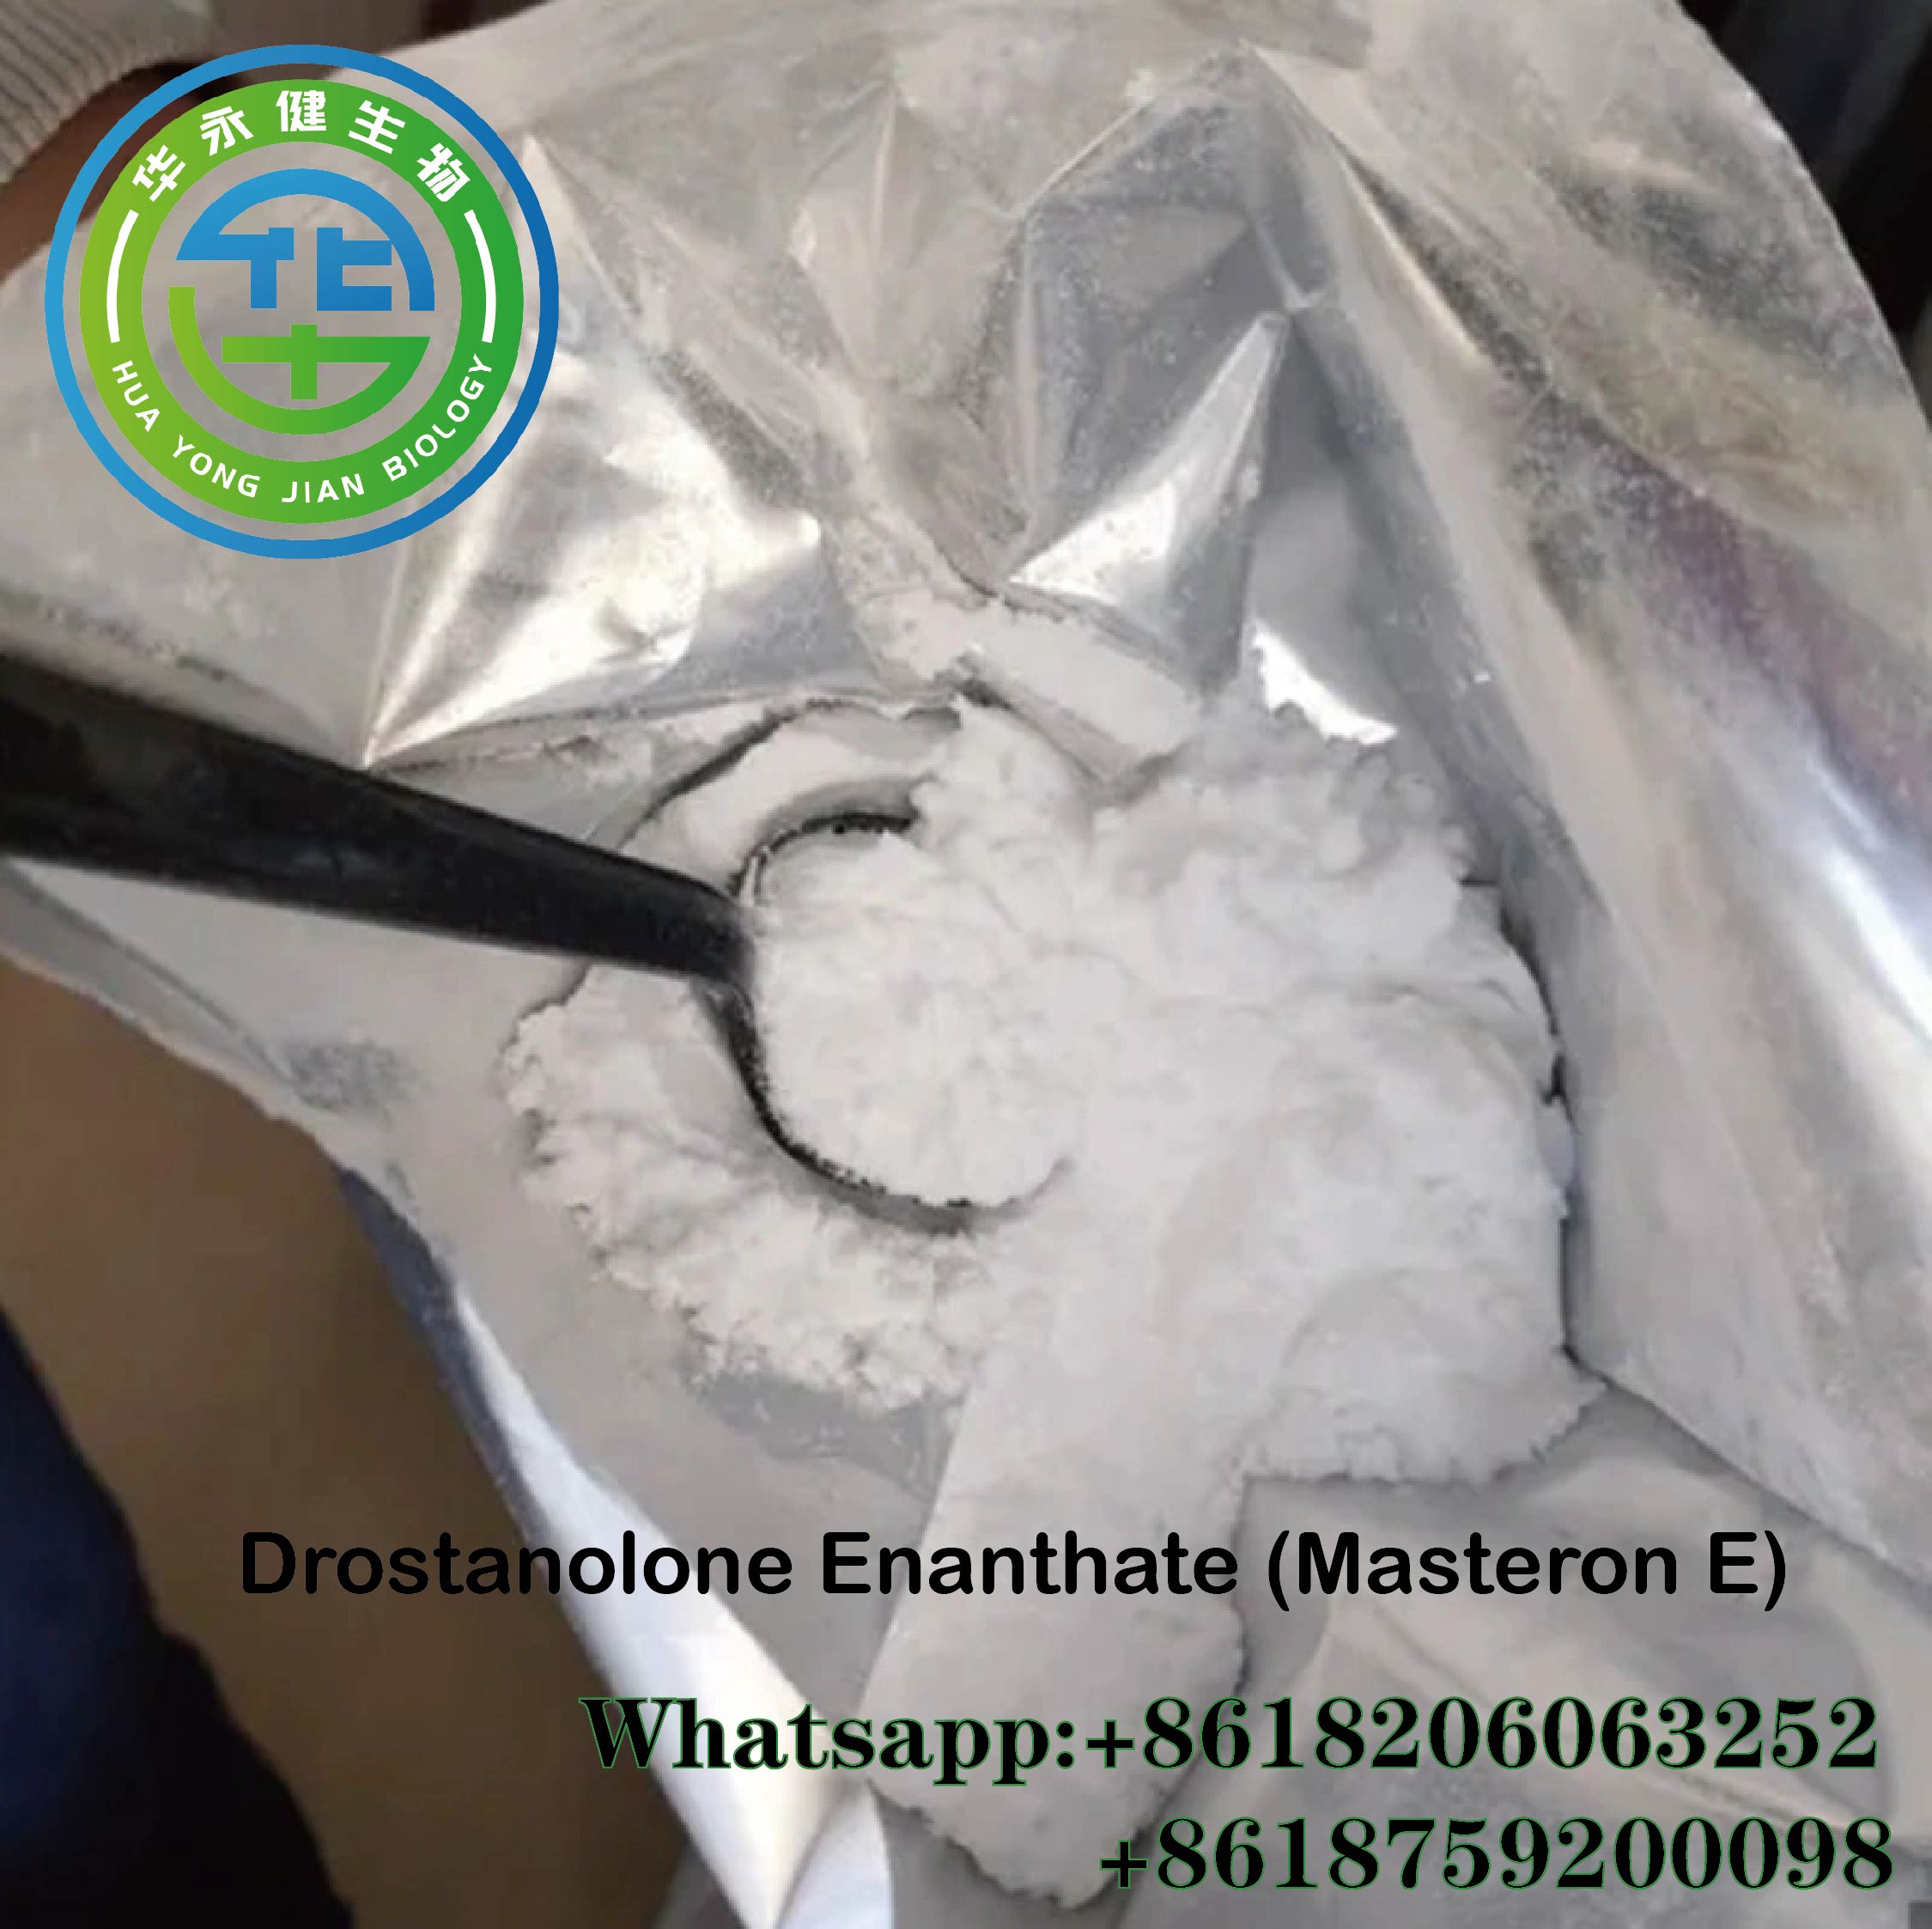 Anabolic Androgenic Drostanolone Enanthate/Masteron E raw powder for Strength Gaining CasNO.472-61-145